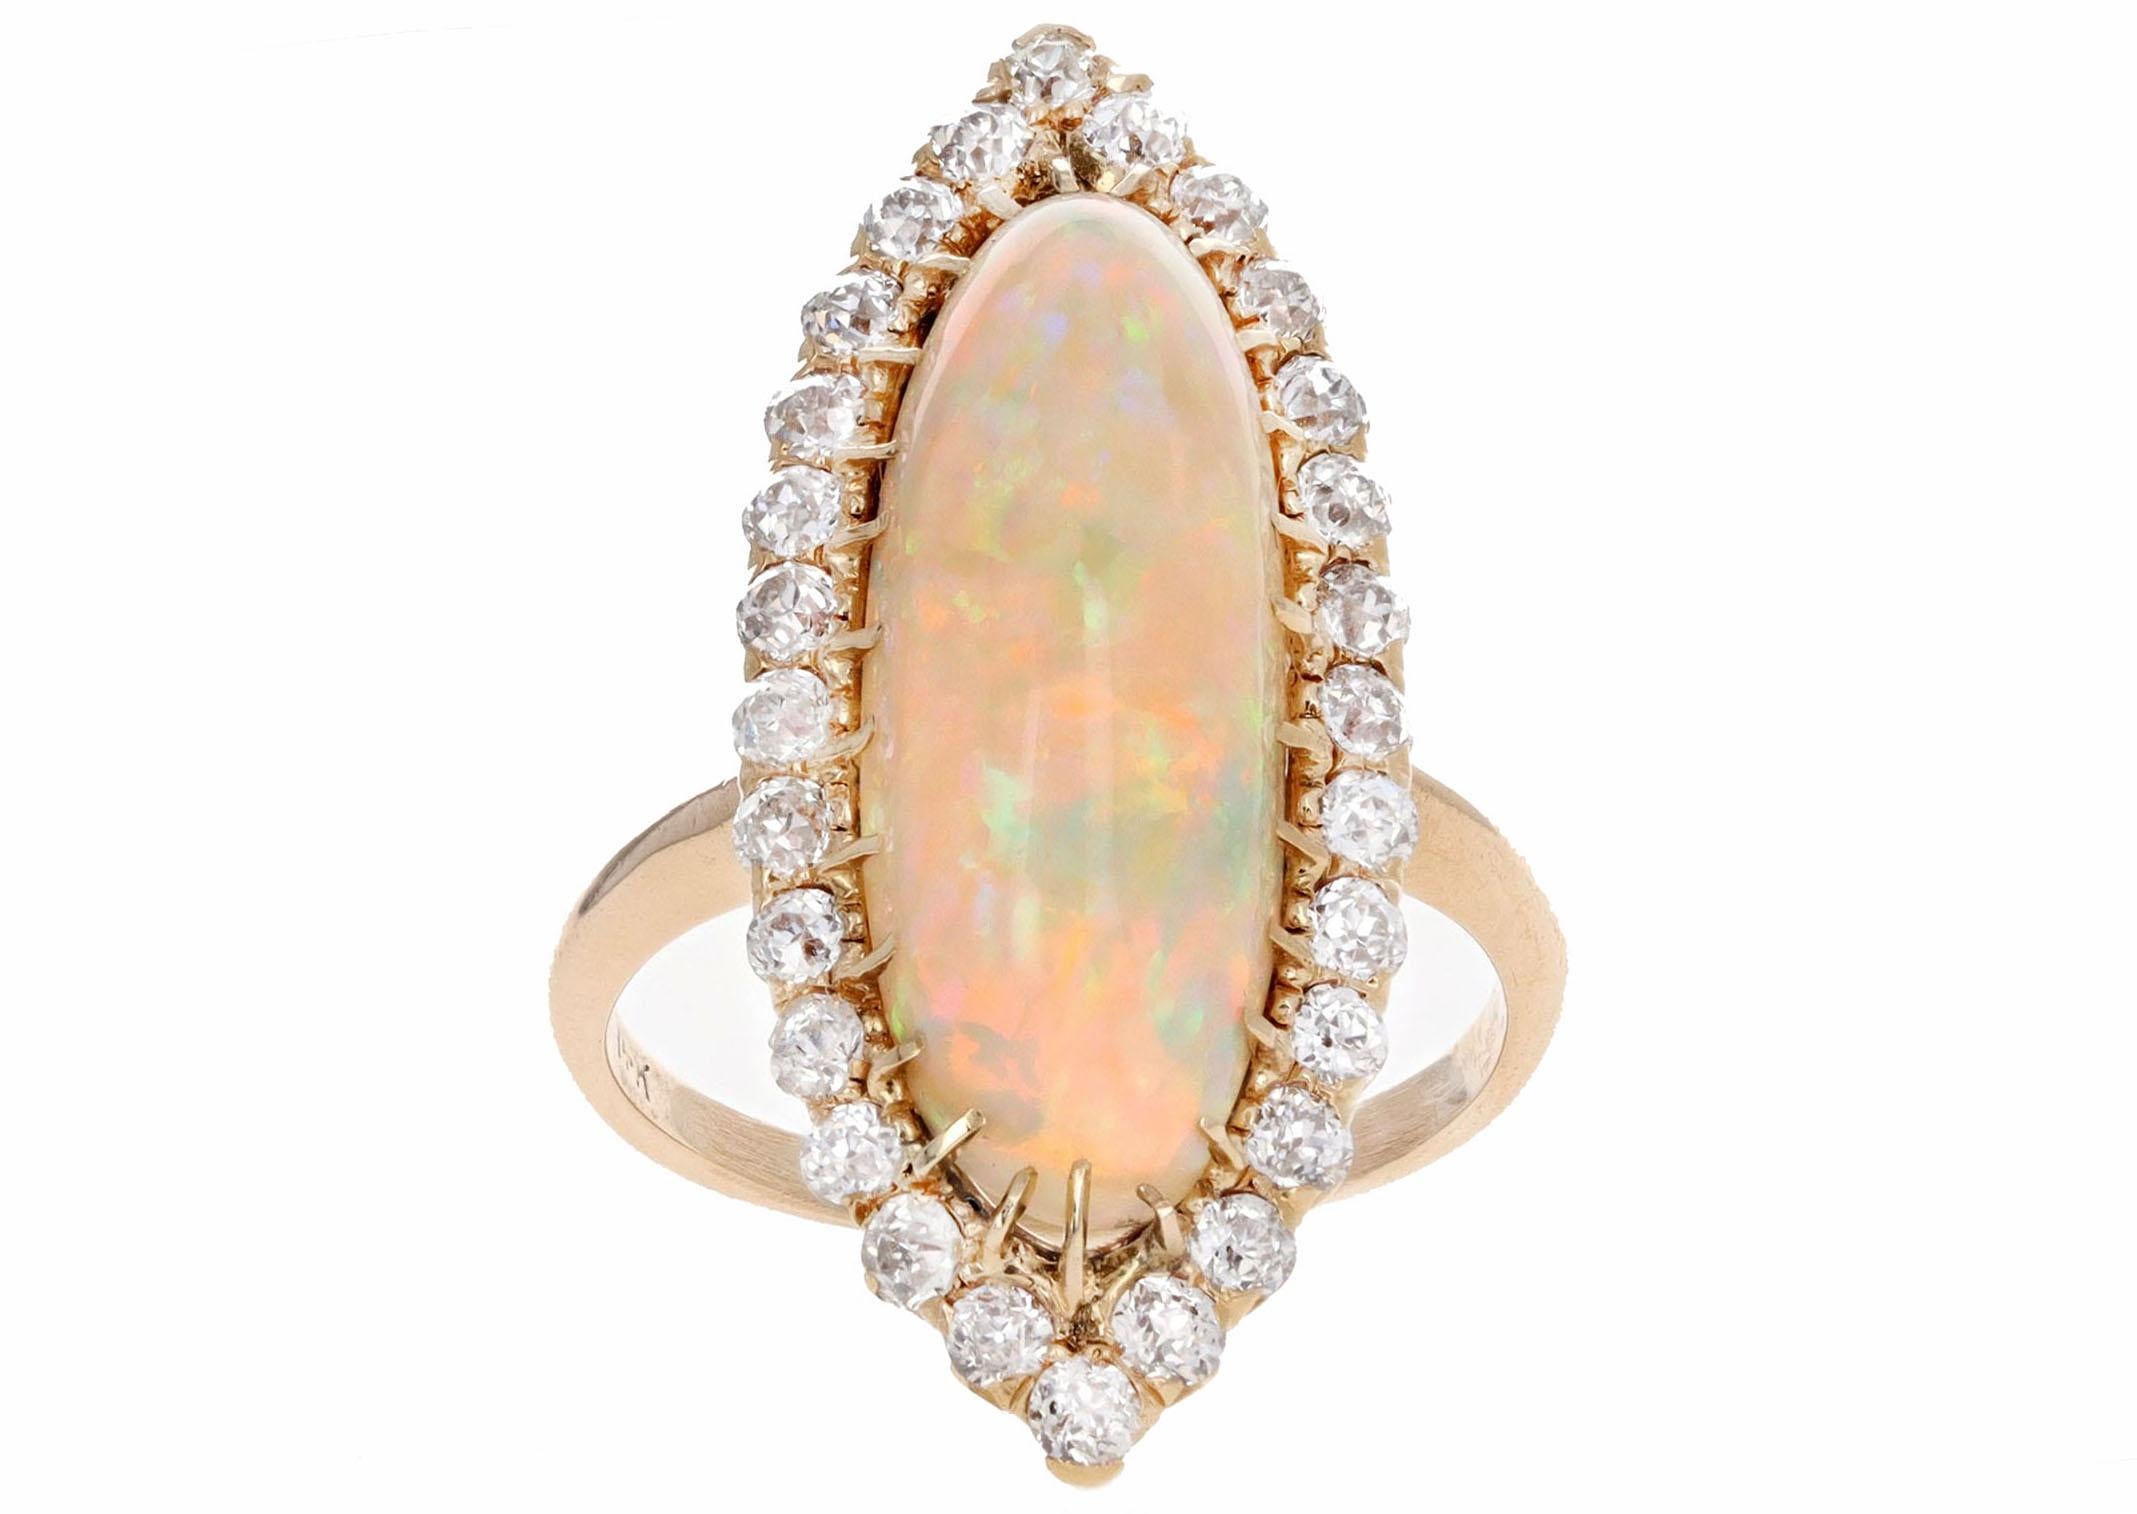 Era: Victorian Estate

Composition: 14K Yellow Gold

Primary Stone: Oval Cabochon Cut Ethiopian Opal

Carat Weight: Approximately 5 Carats

Accent Stone: Twenty Eight Old European Cut Diamonds

Carat Weight: Approximately 0.56 Carats in